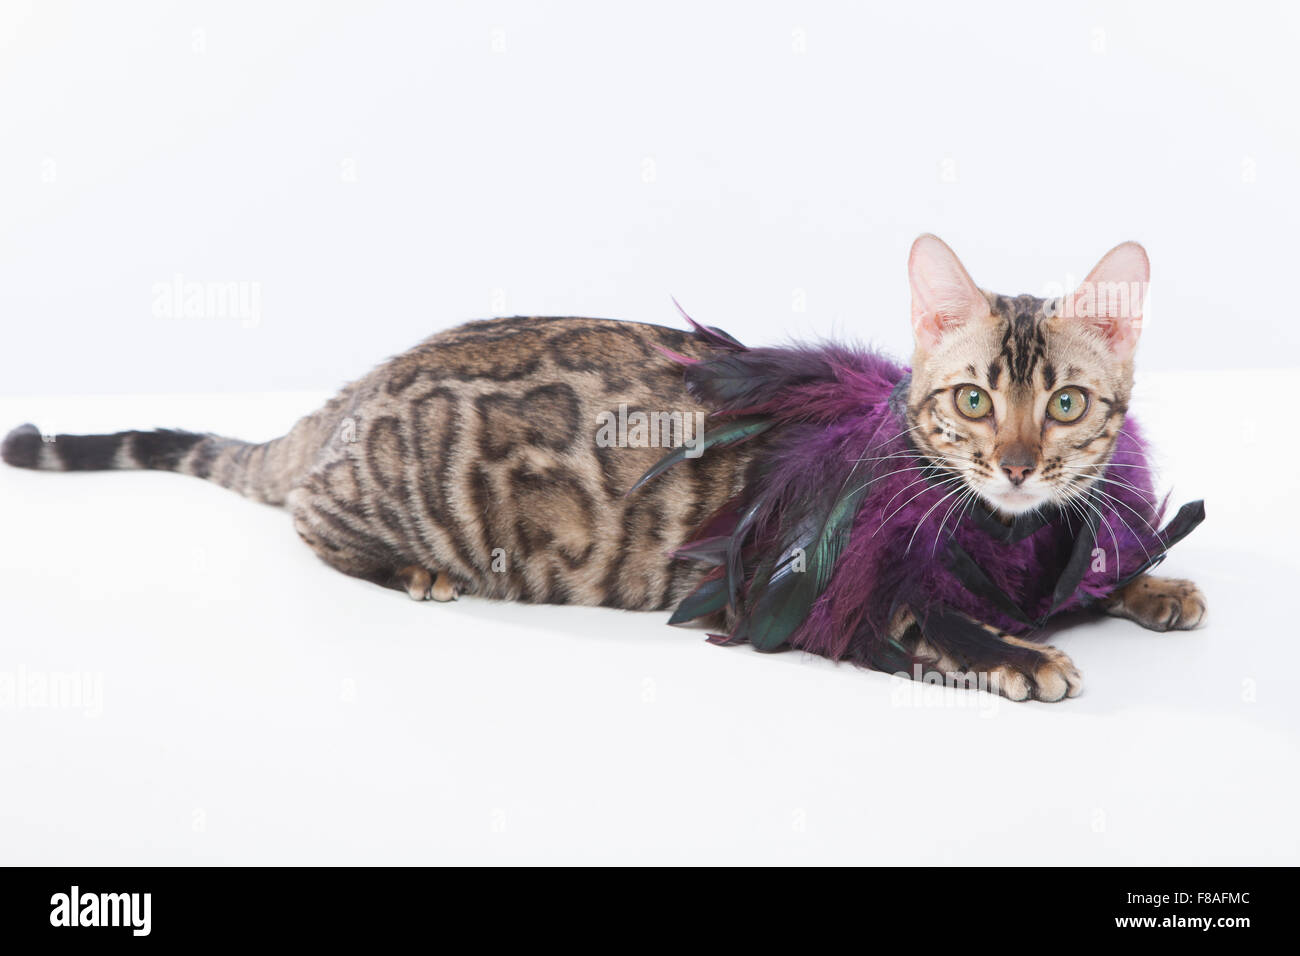 Bengal cat with feather accessory lying down Stock Photo